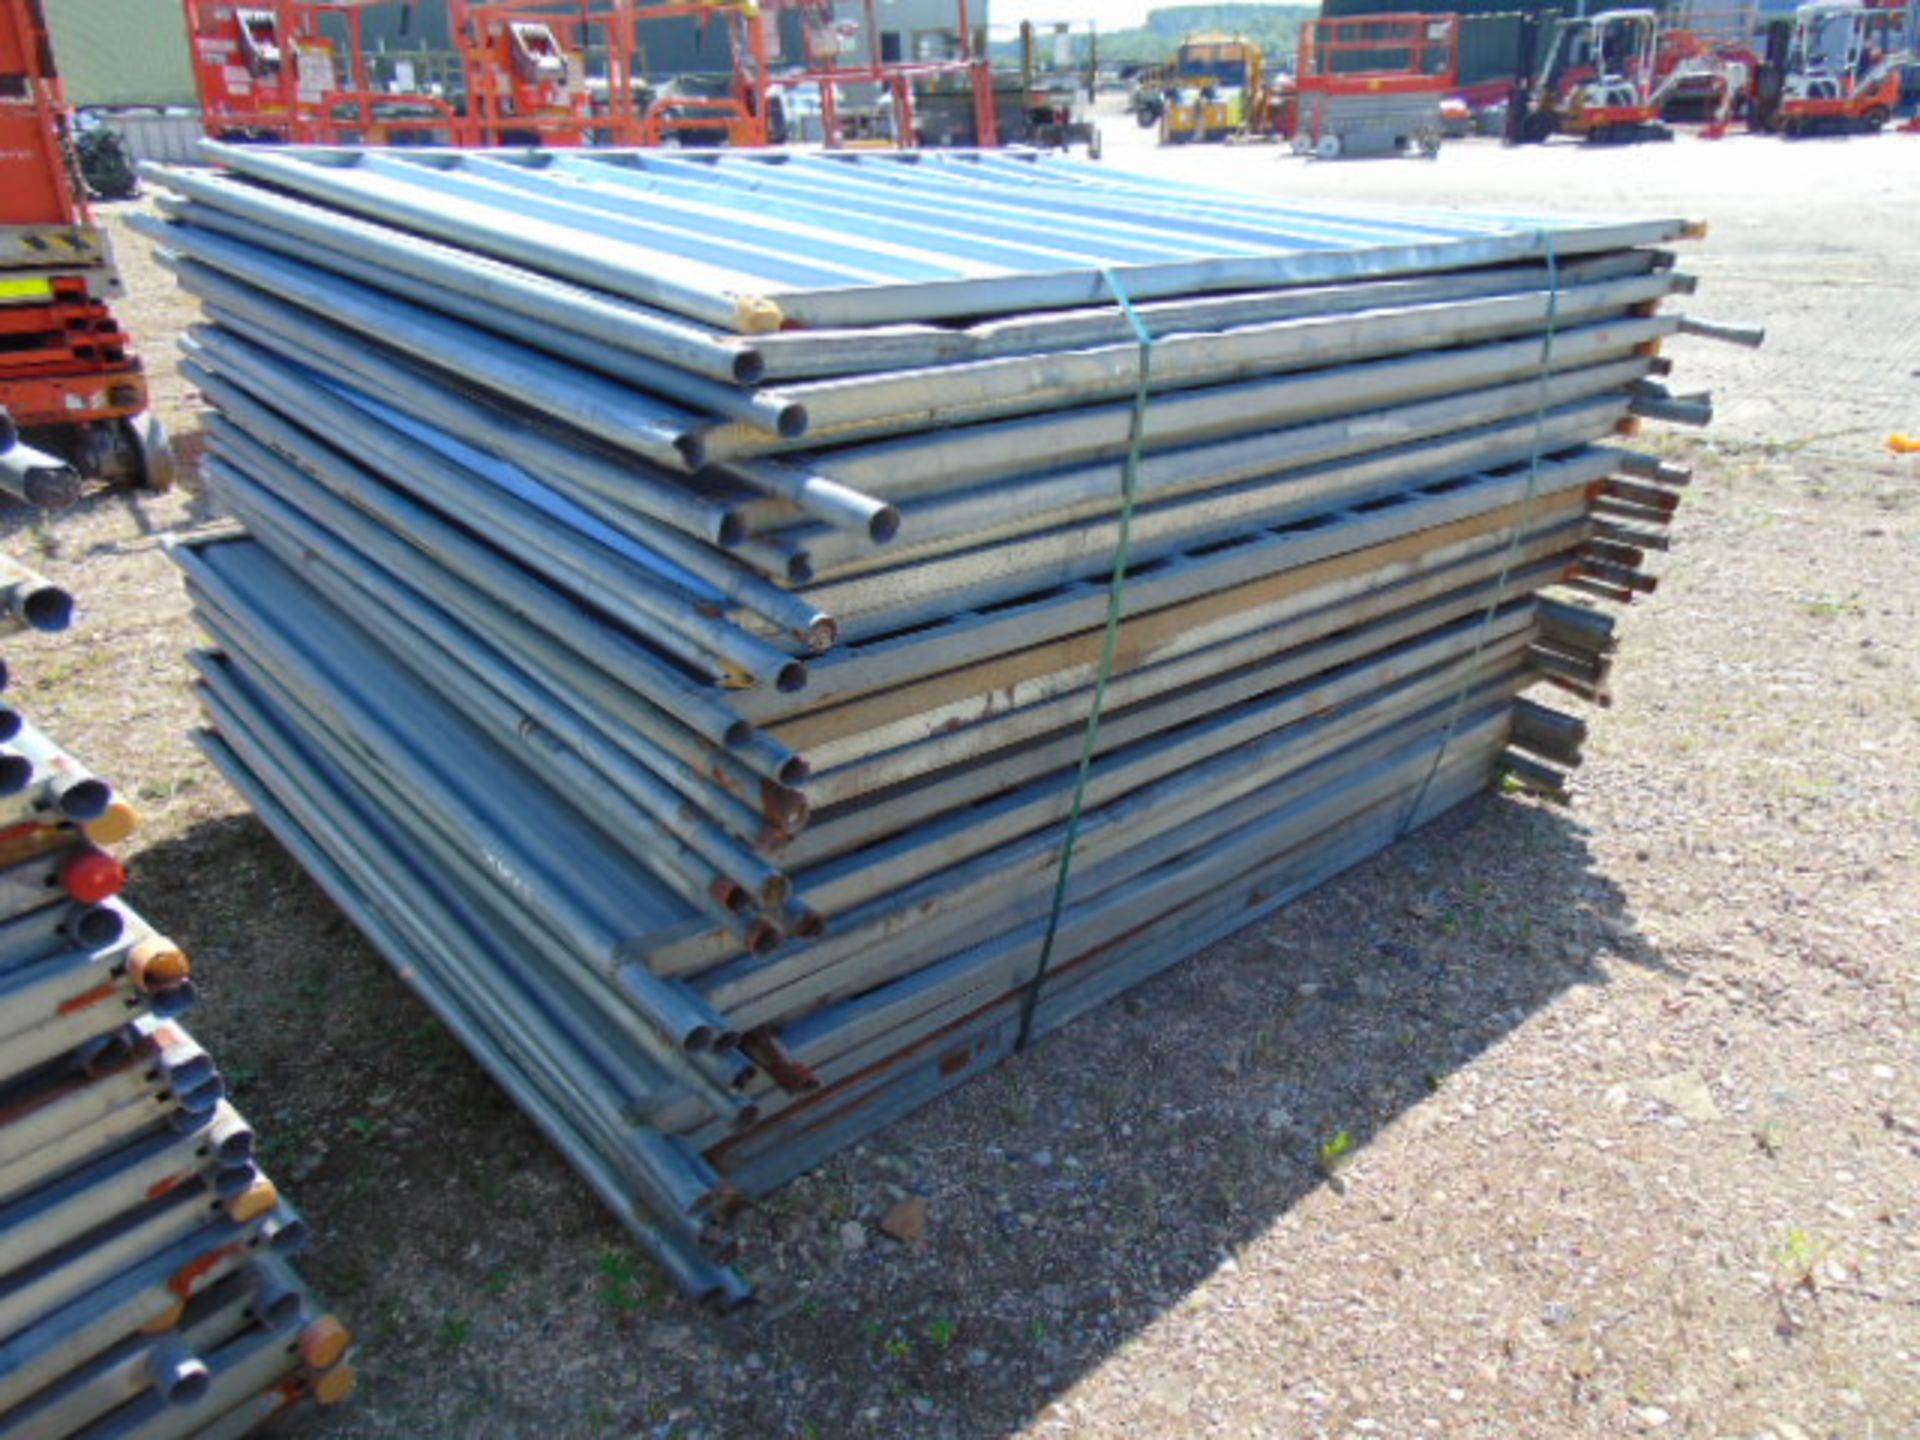 30 x Heras Style Hoarding / Security Fencing Panels 2.15m x 2m - Image 2 of 4